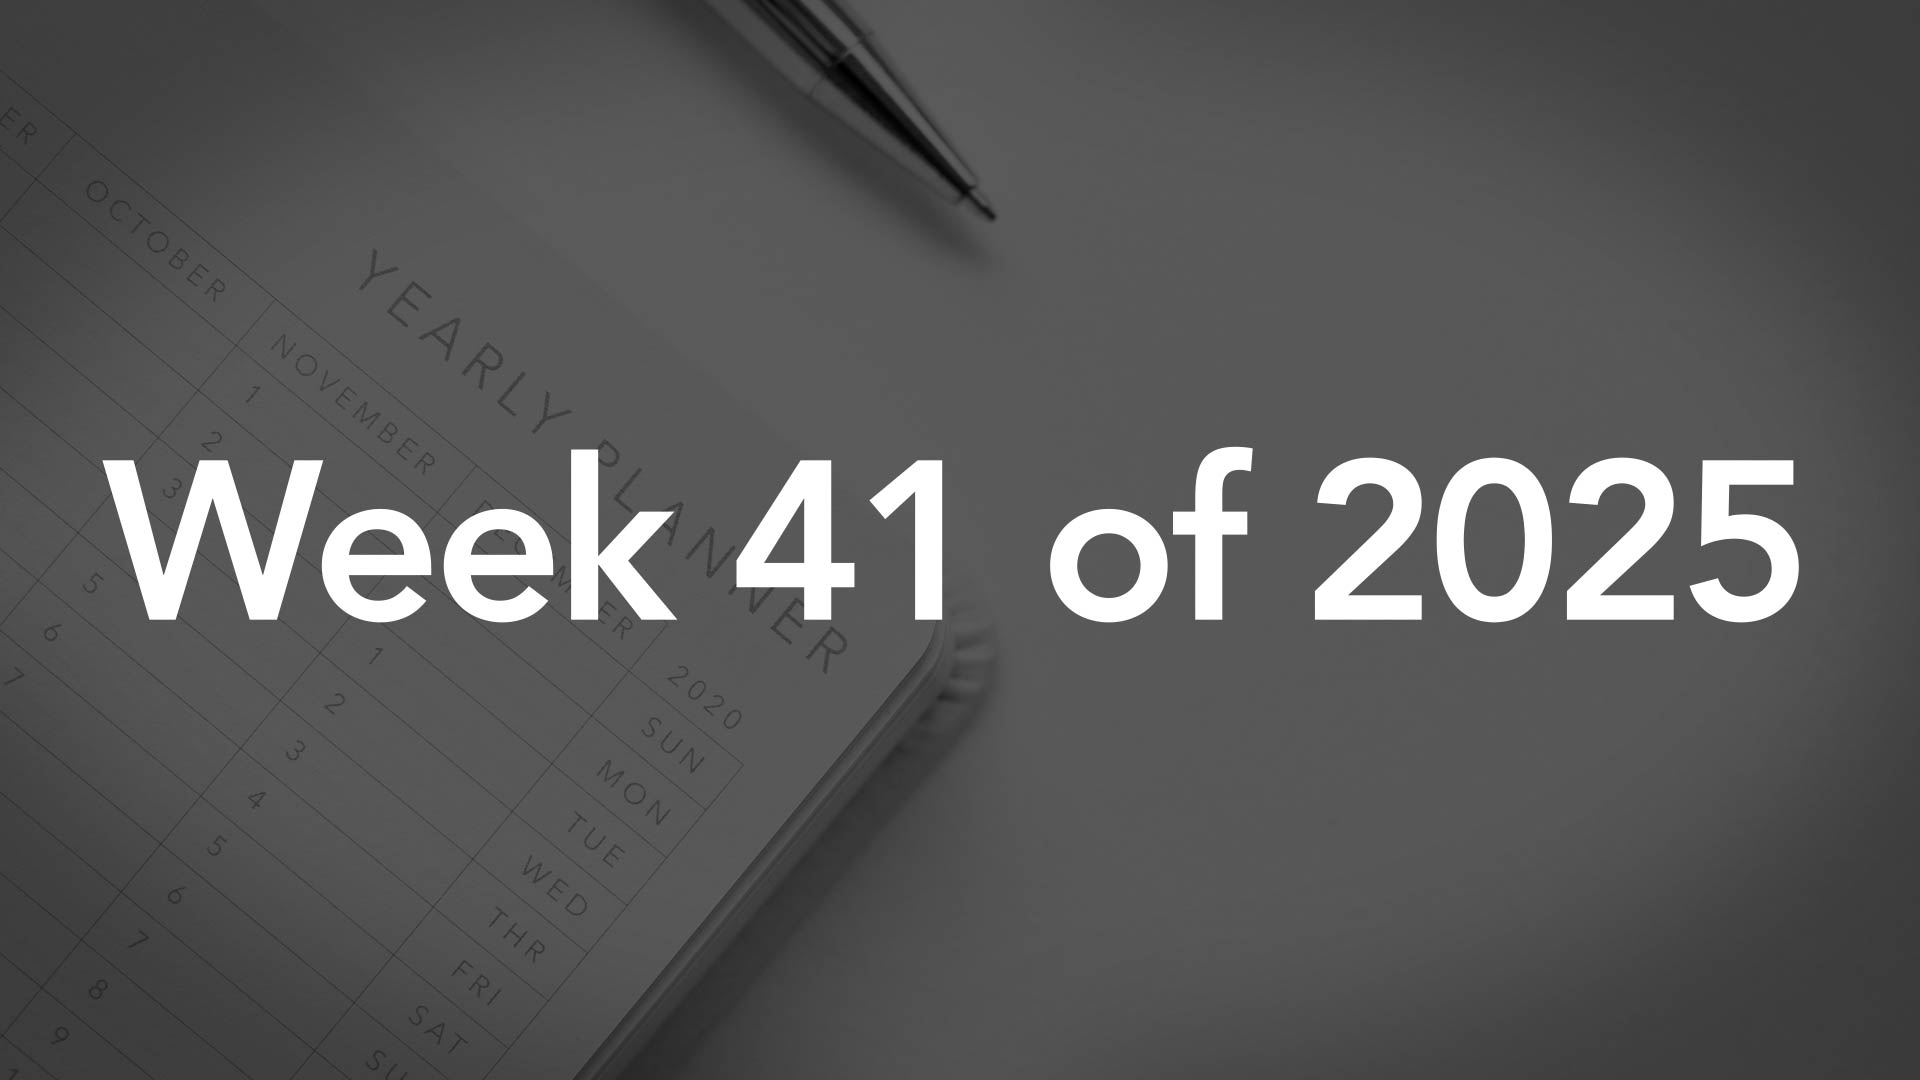 List Of National Days For Week 41 Of 2025